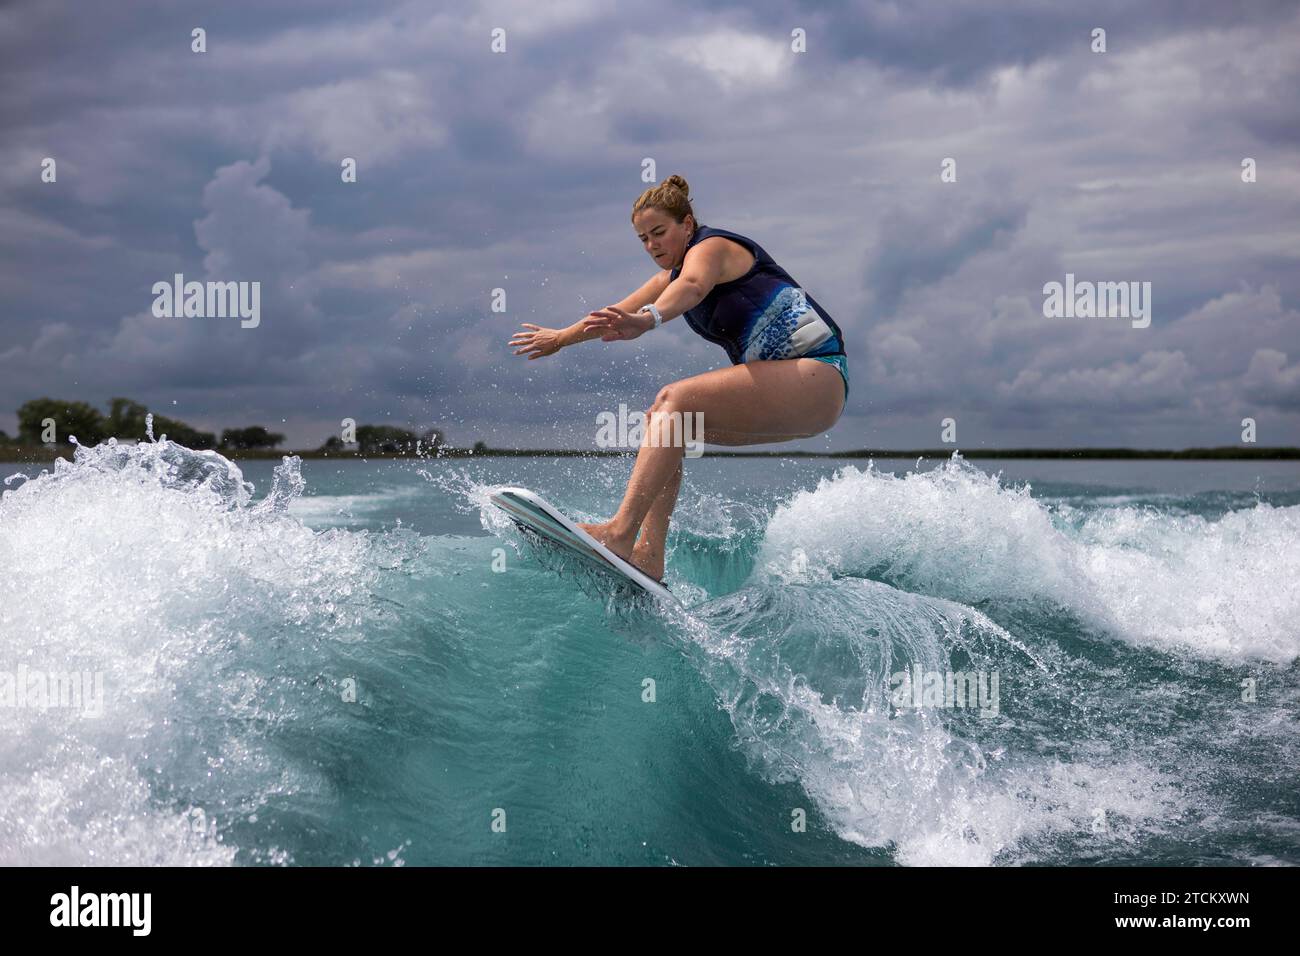 A woman aggressively riding a surfboard on a boat wake. Stock Photo